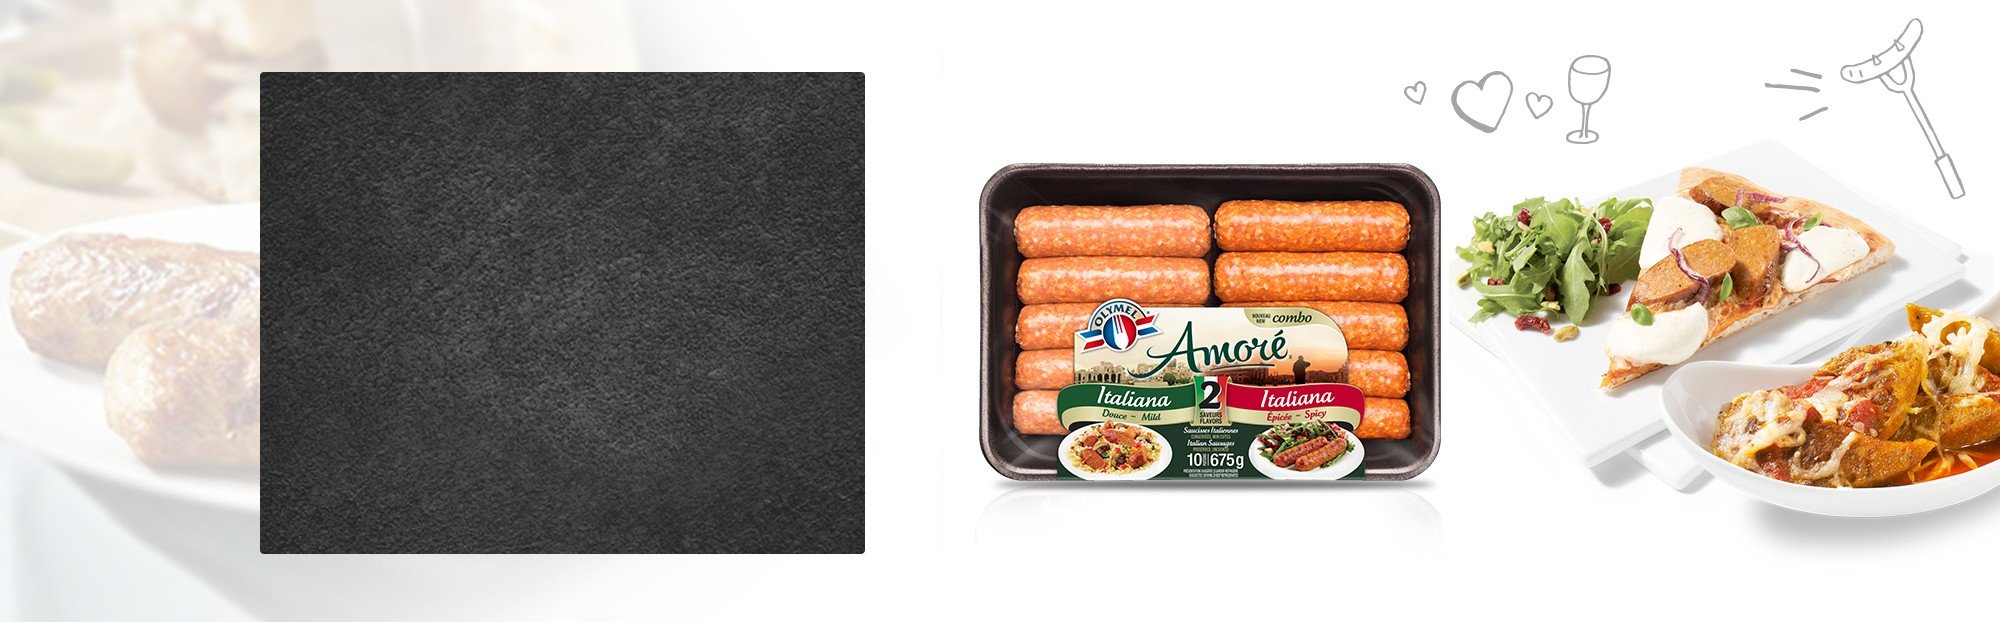 Combo Amoré Sausages Mild Italian and Spicy Italian